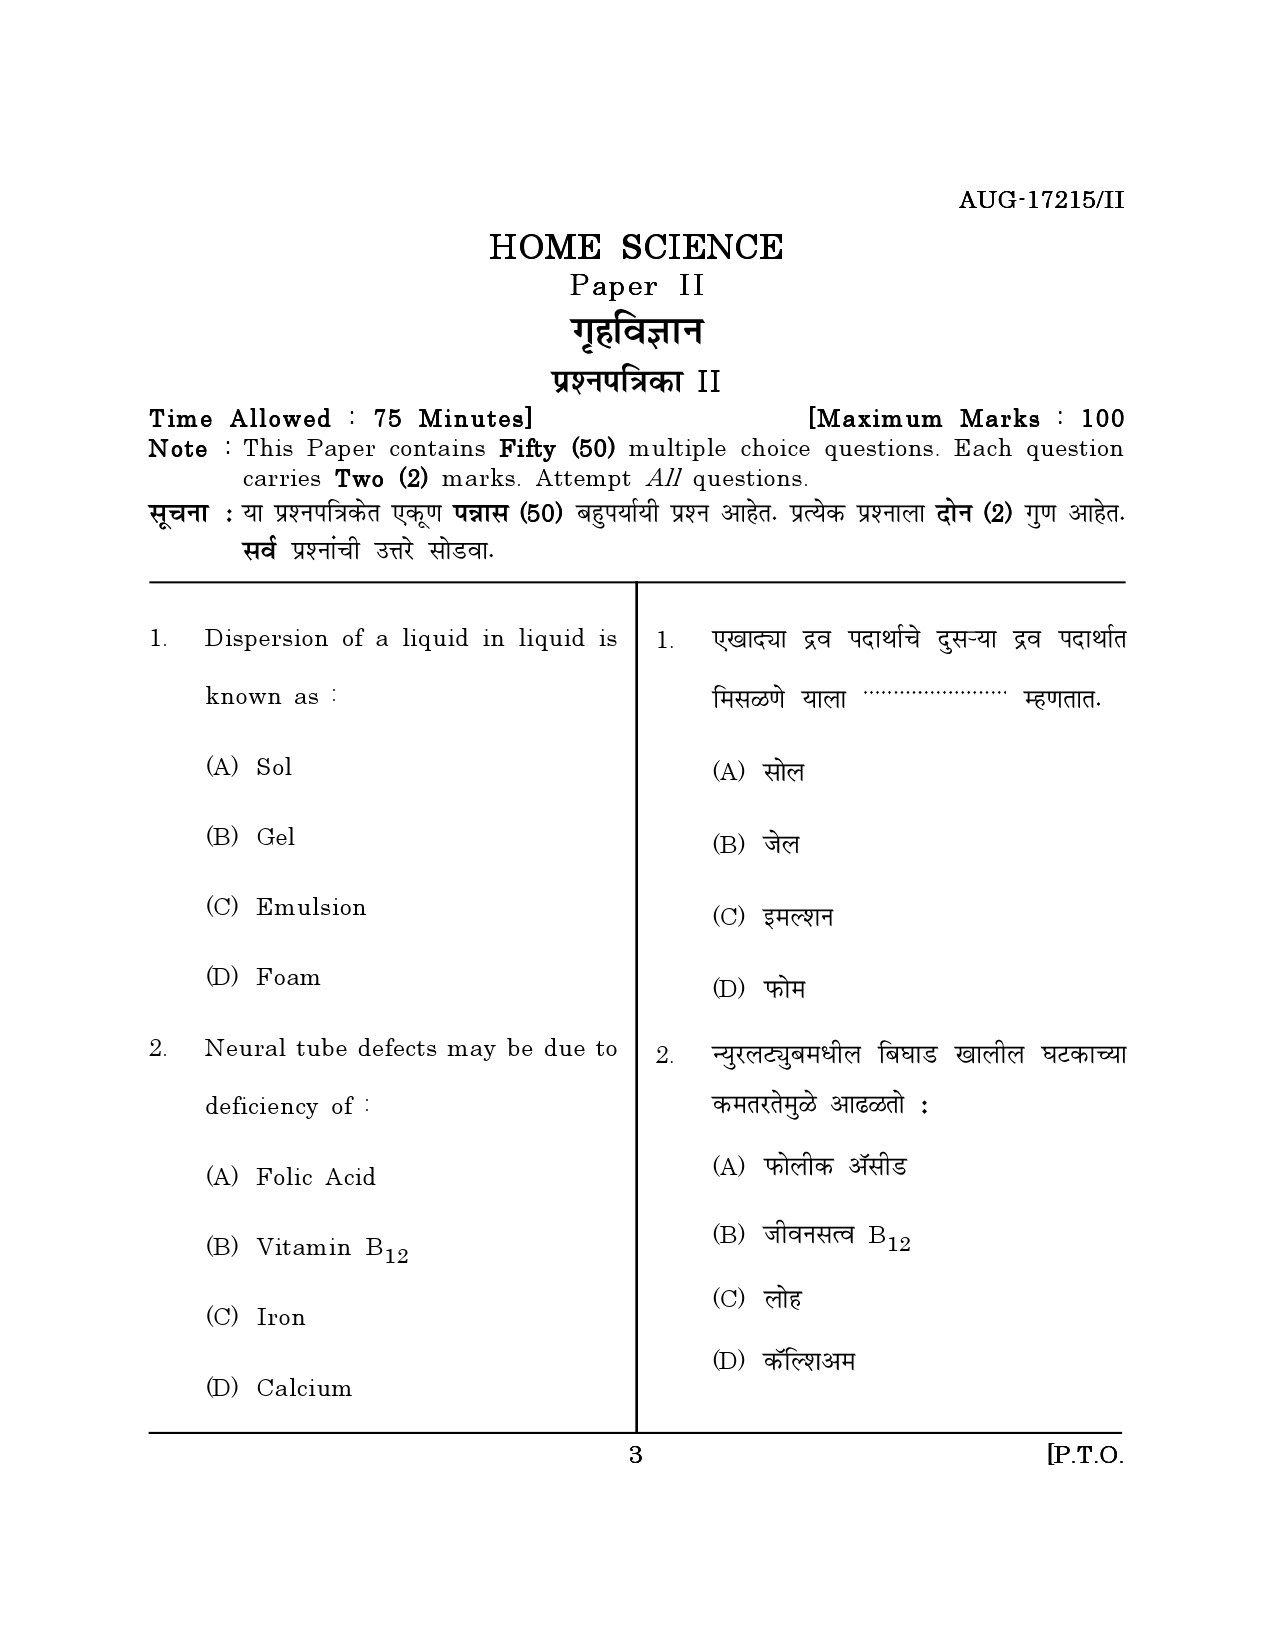 Maharashtra SET Home Science Question Paper II August 2015 2